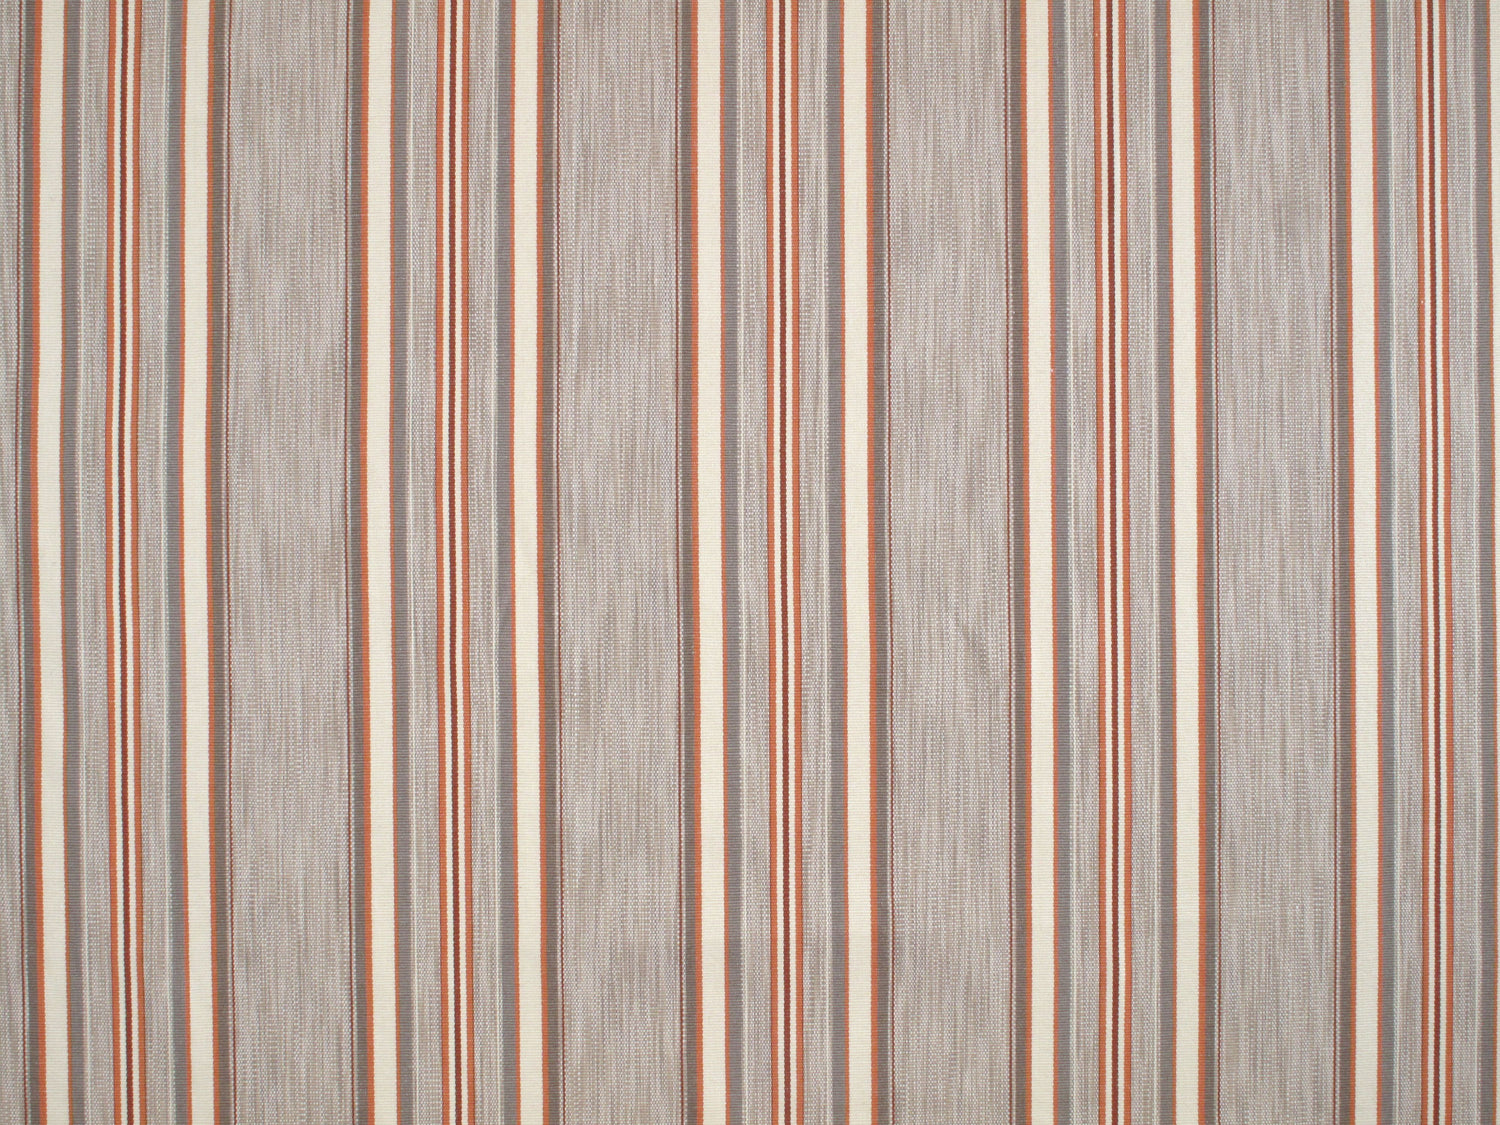 Bandos fabric in sand bar color - pattern number PQ 0003A168 - by Scalamandre in the Old World Weavers collection